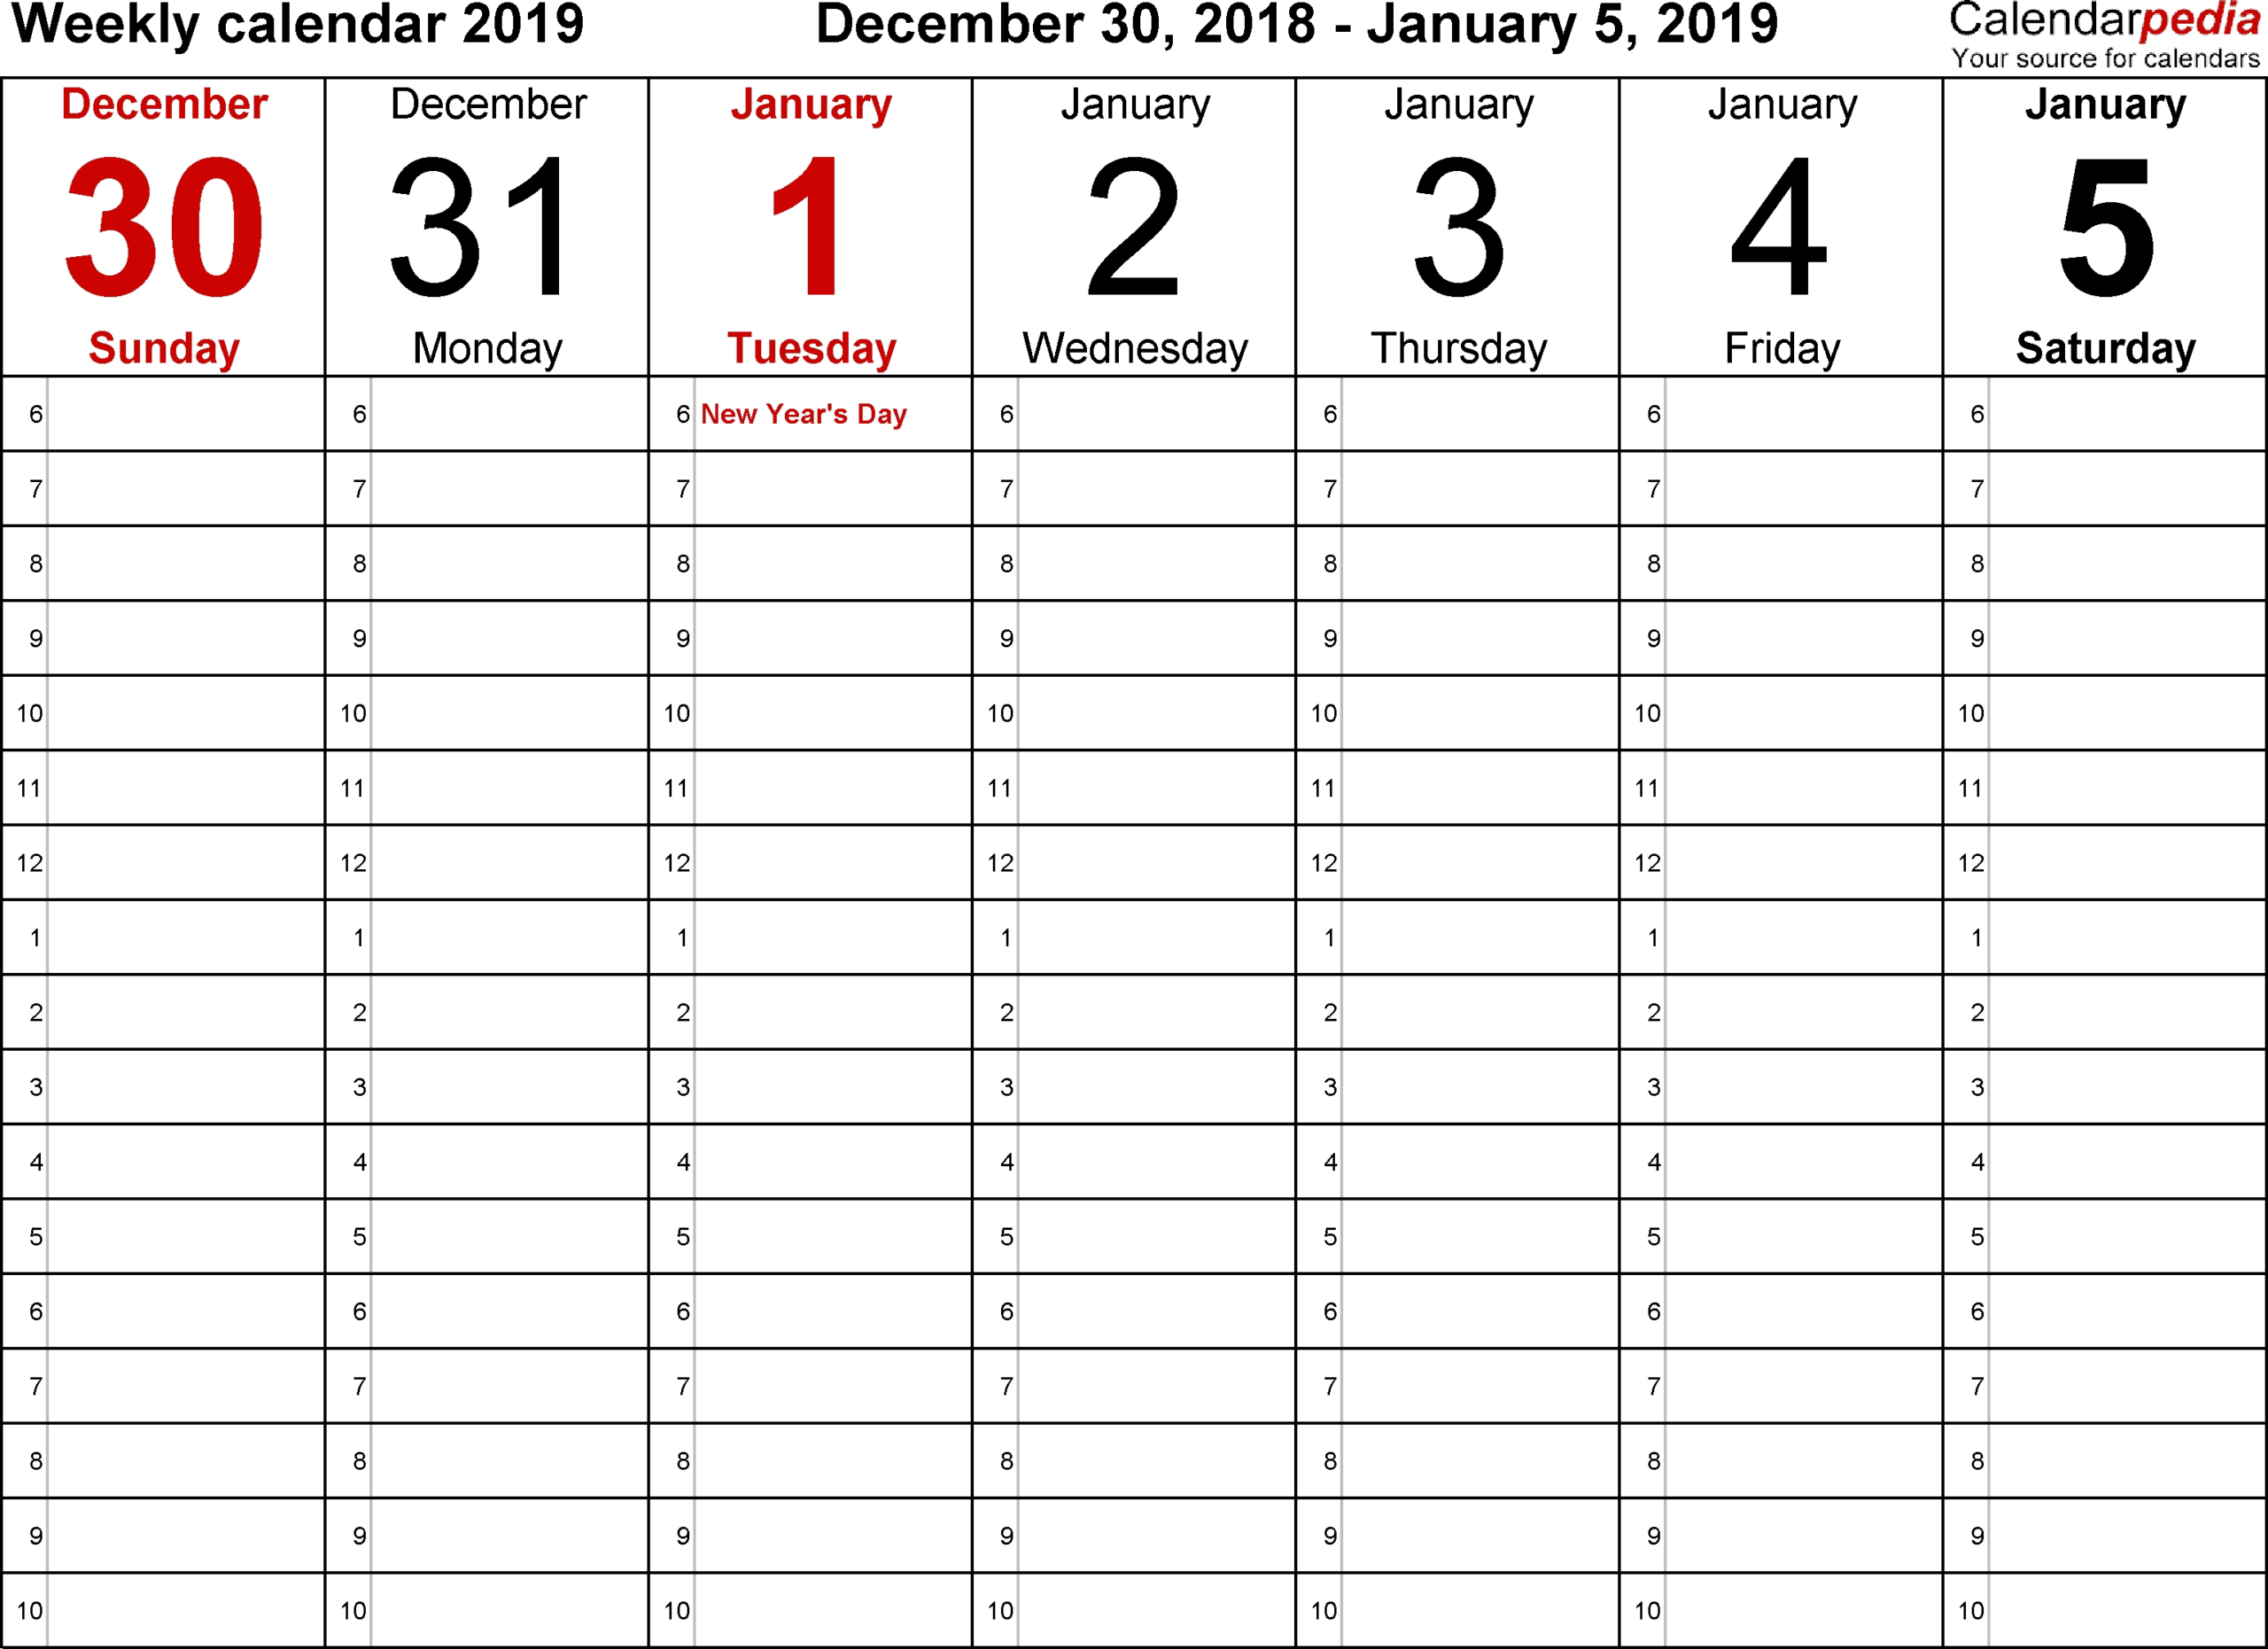 Blank Calendars To Print With Time Slots - Calendar  Calendar Template With Times